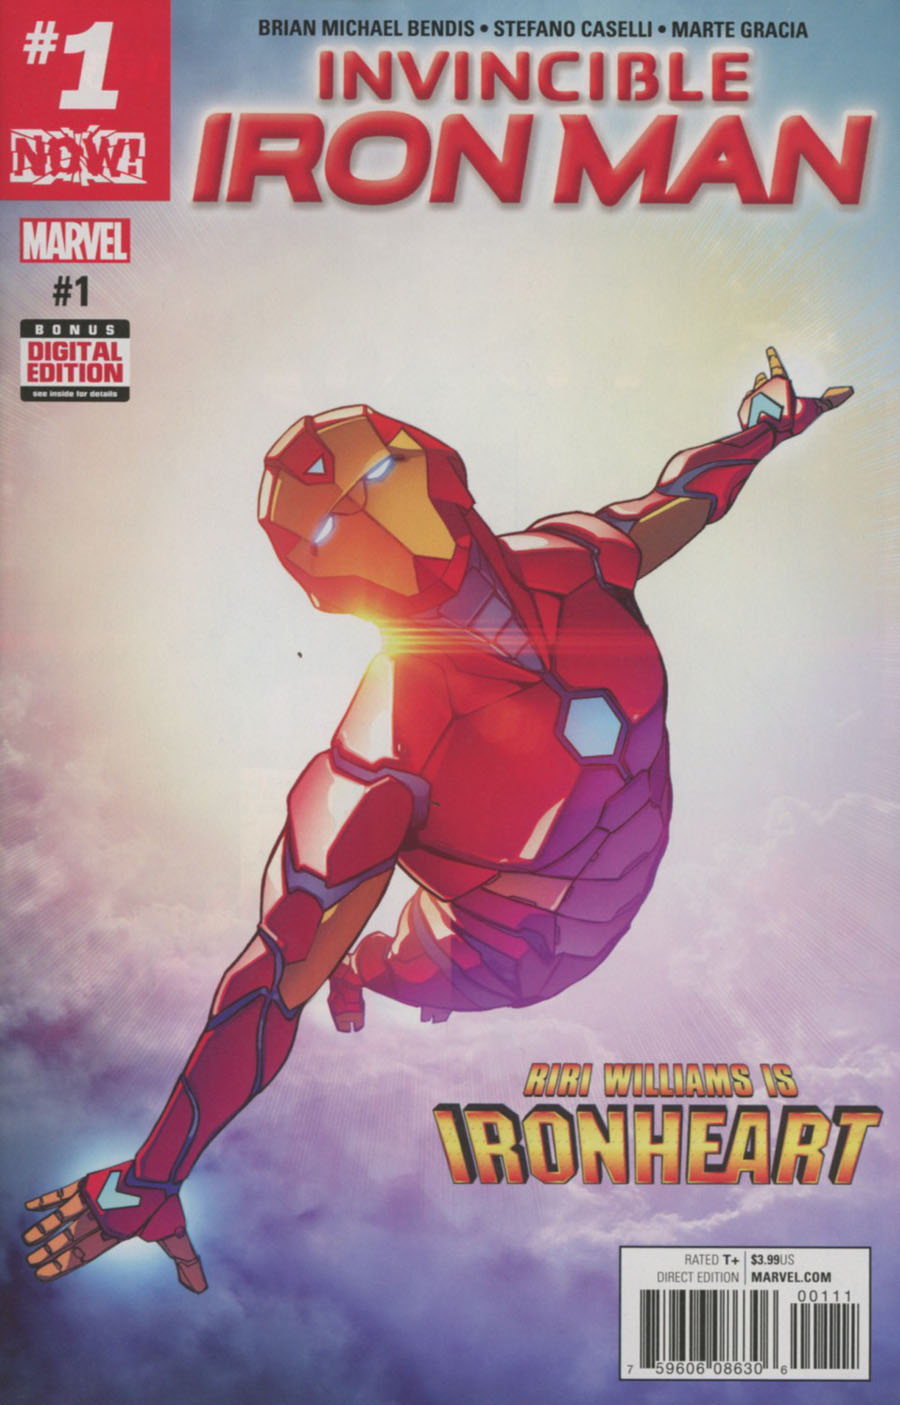 Invincible Iron Man Vol 3 #1 Cover A 1st Ptg Regular Stefano Caselli Cover (Marvel Now Tie-In)